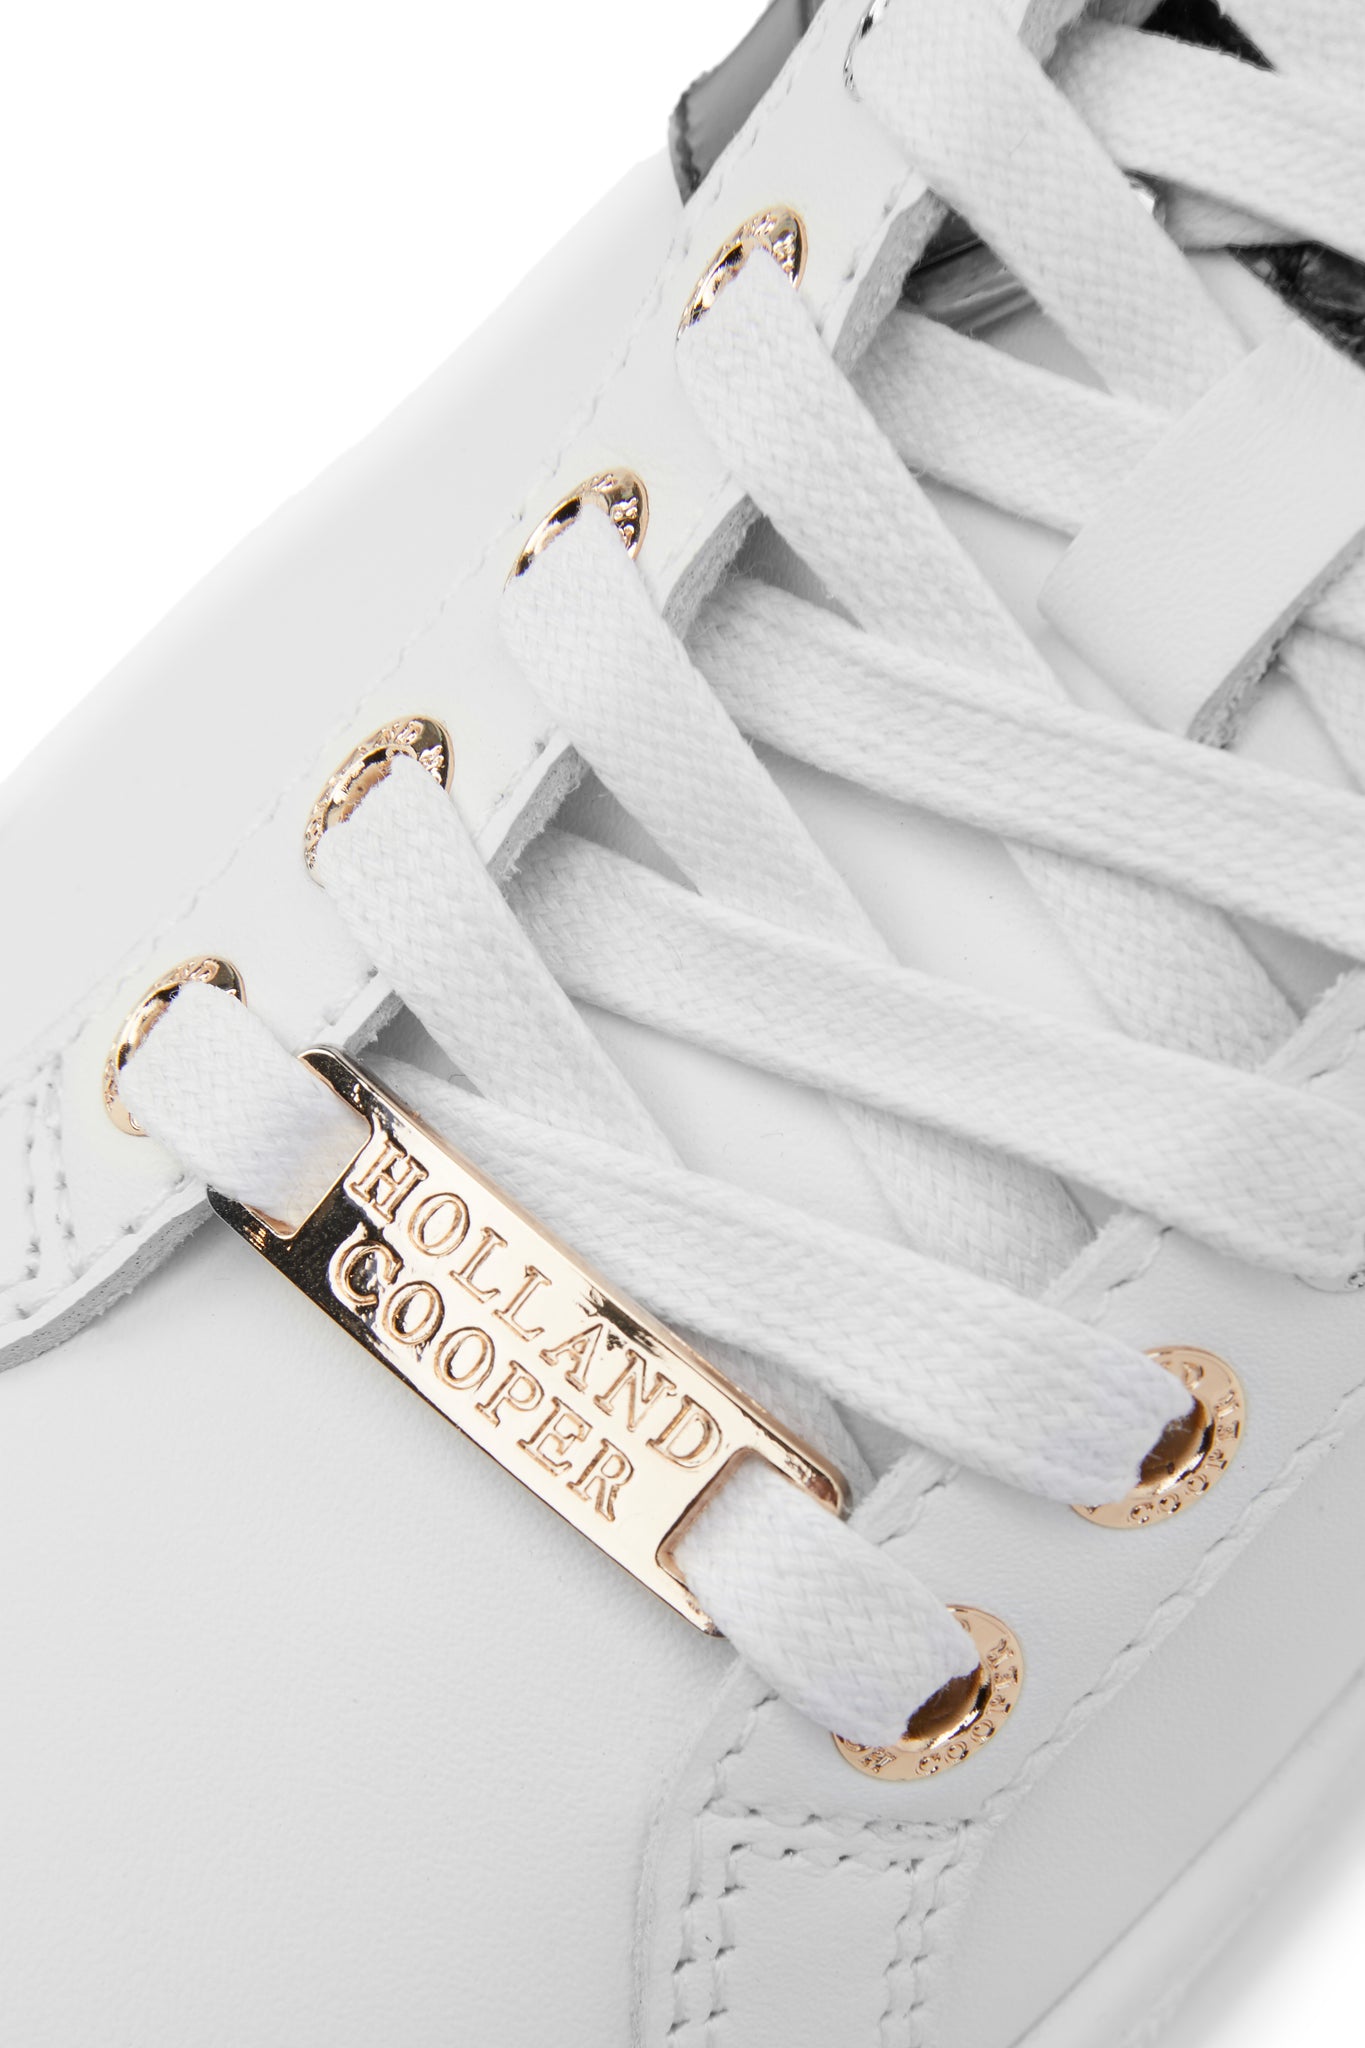 Birds eye view of the gold details on the white laces of the trainer